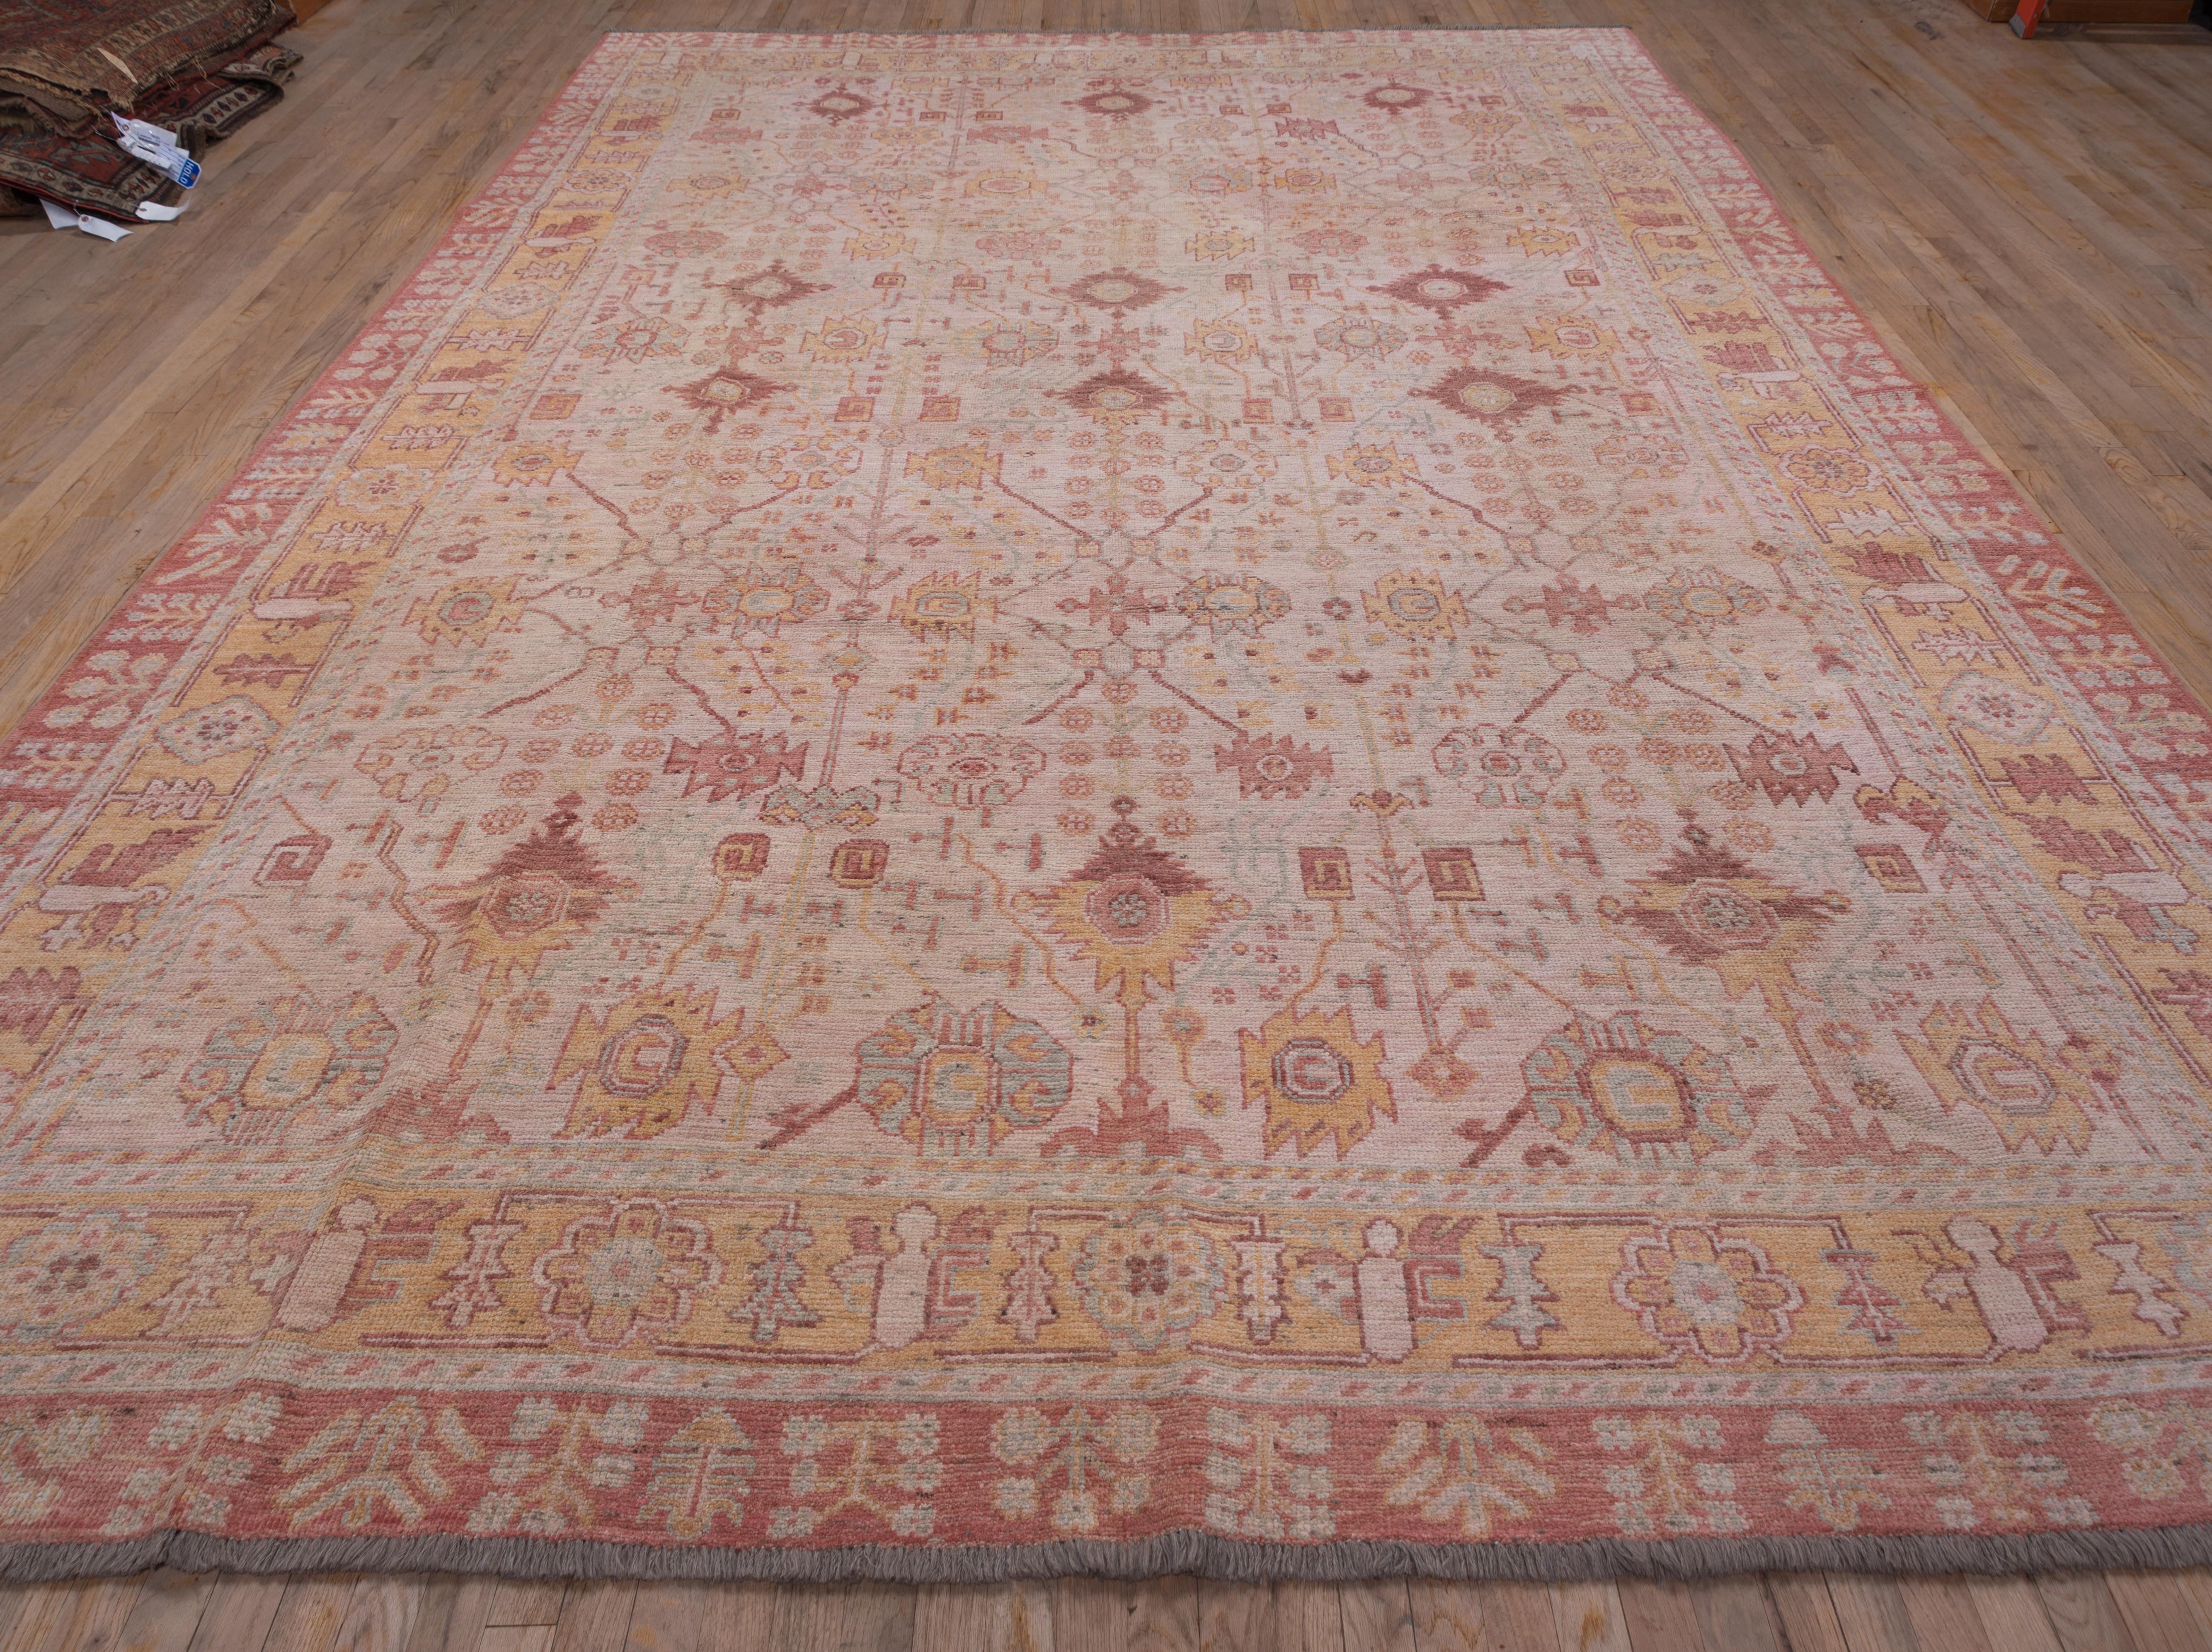 Although this was named for a town in Oklahoma, we think its the perfect name because of the gorgeous colors in this Oushak rug. Peaches, pinks and shades of clay and mint make this colorful yet easy on the eye. Thousands of options of ways to go